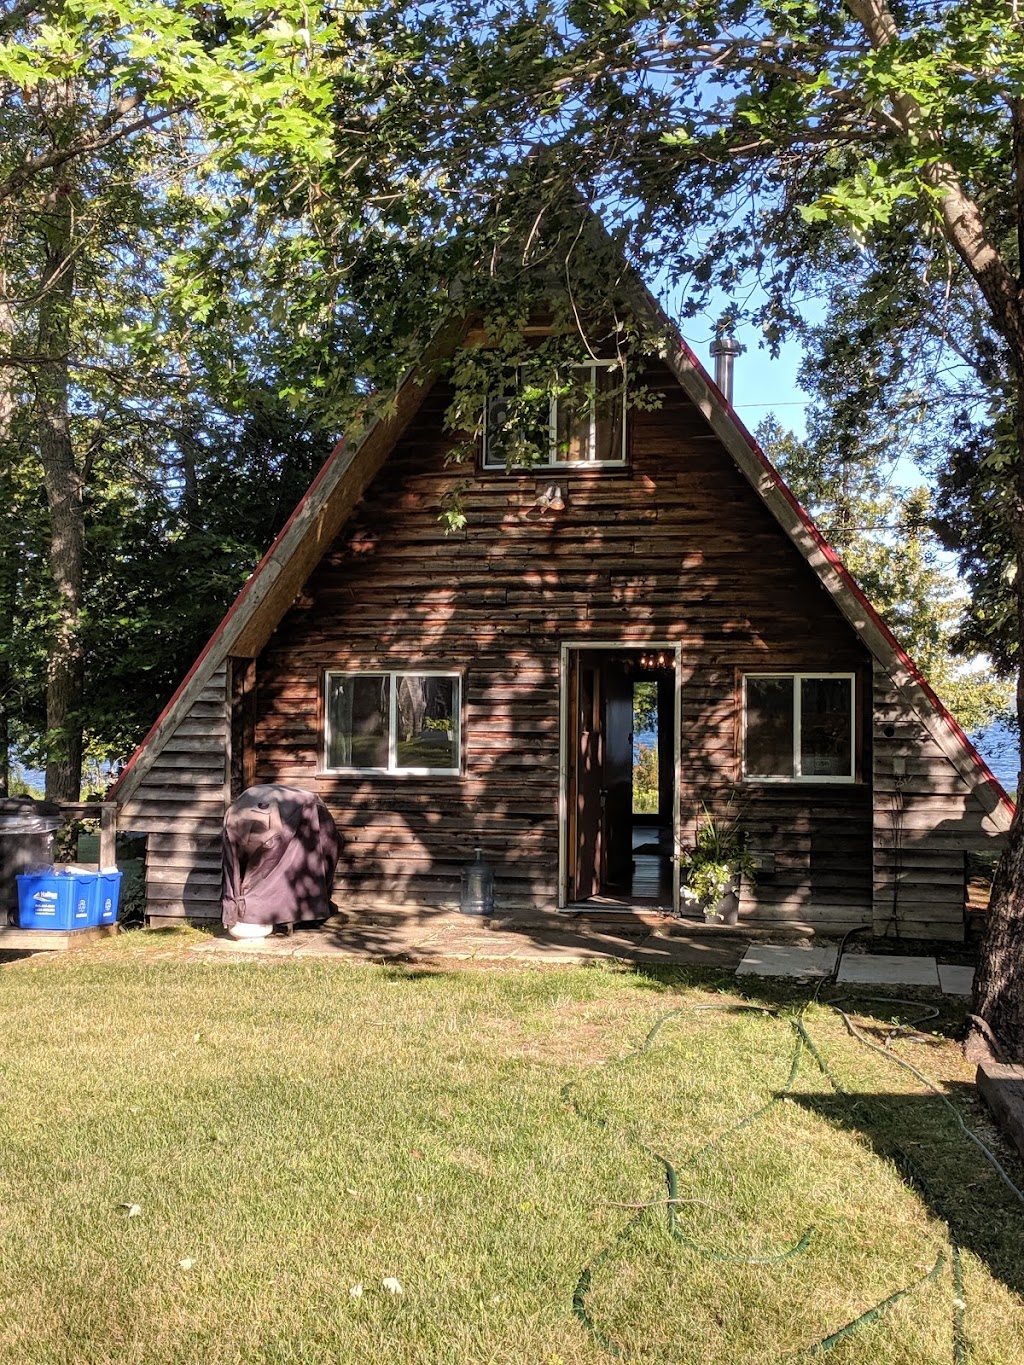 SUMMER BLOOM COTTAGE | lodging | 39 Grandor Rd, Kagawong, ON P0P 1J0, Canada | 7052820279 OR +1 705-282-0279